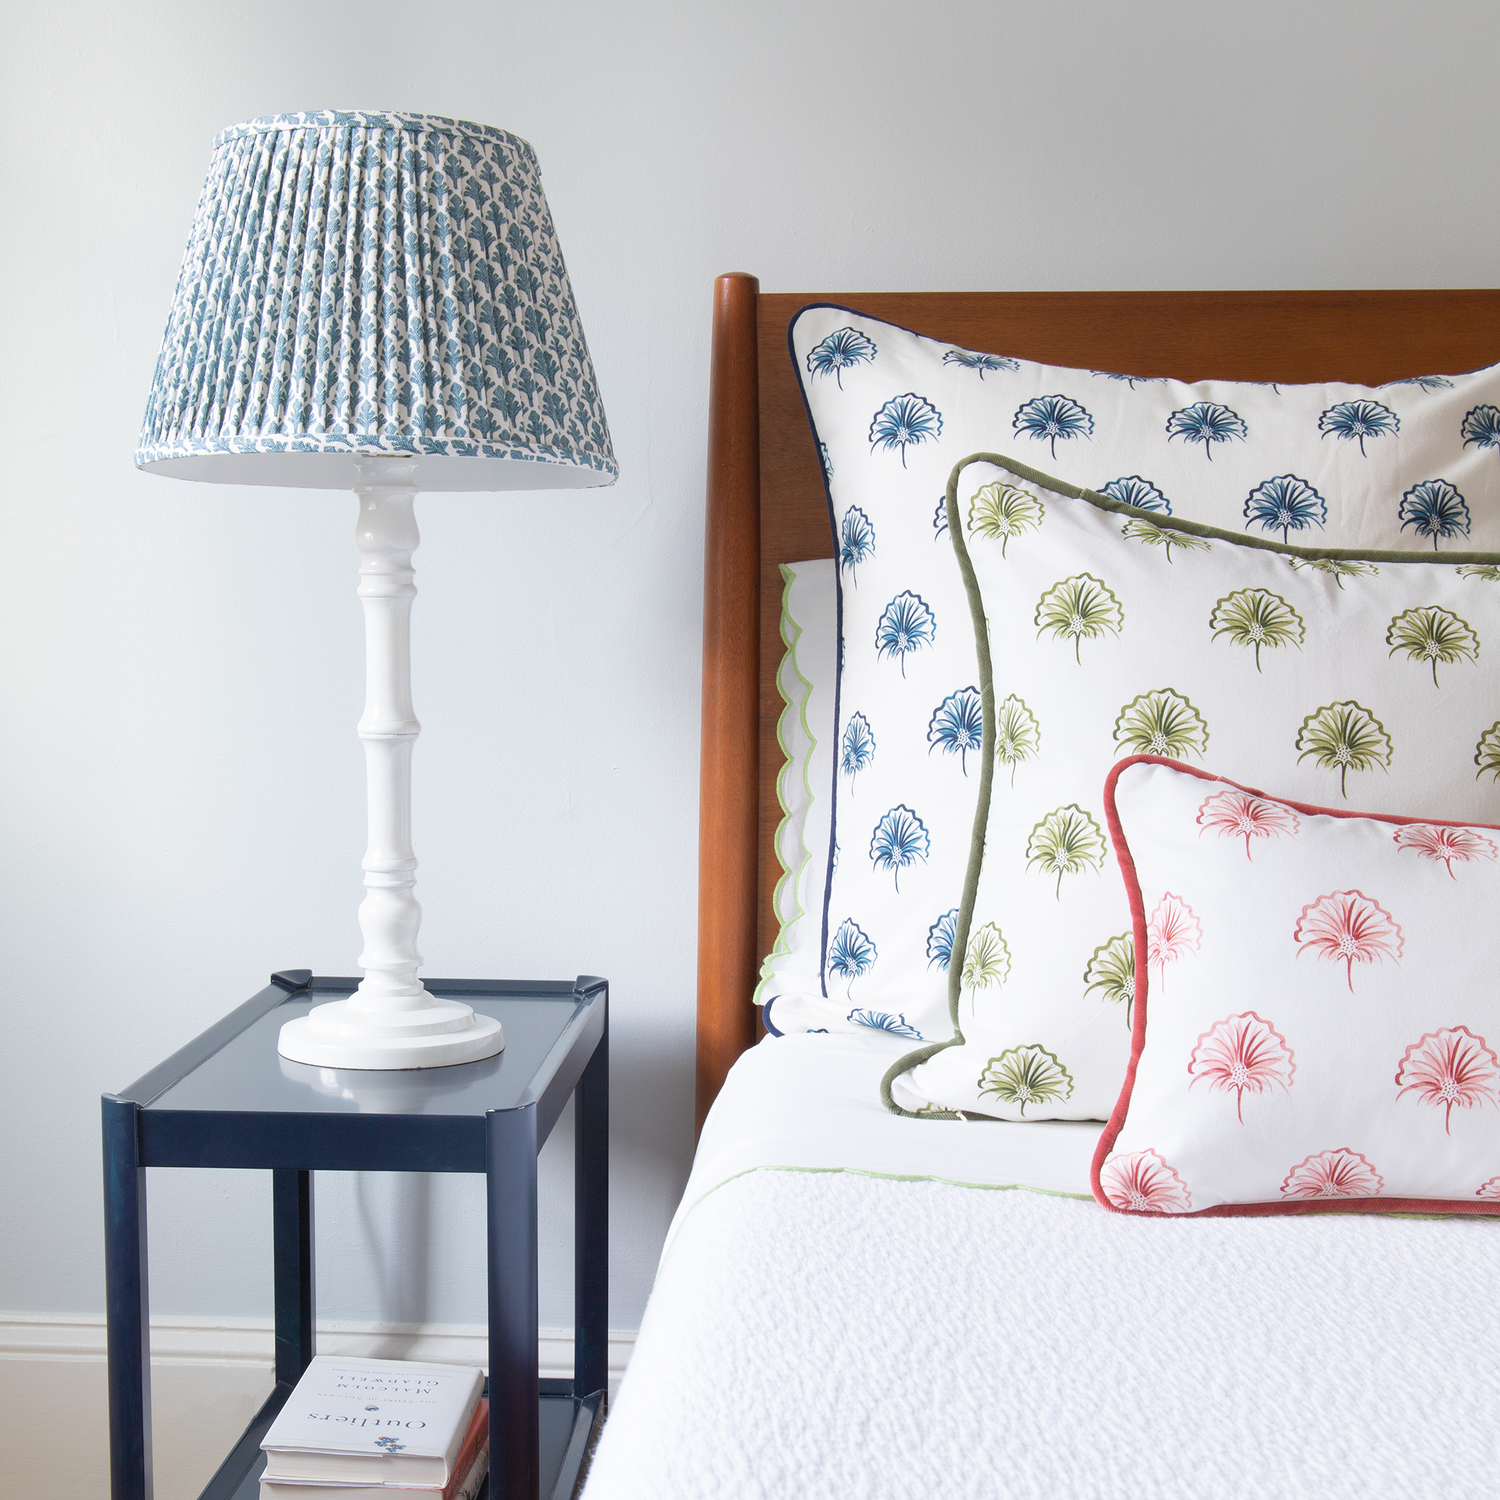 Bed Close-up styled with Floral Navy Printed Pillow, Floral Green Printed Pillow, and Rose Floral Printed Pillow next to navy blue nightstand with white lamp on top